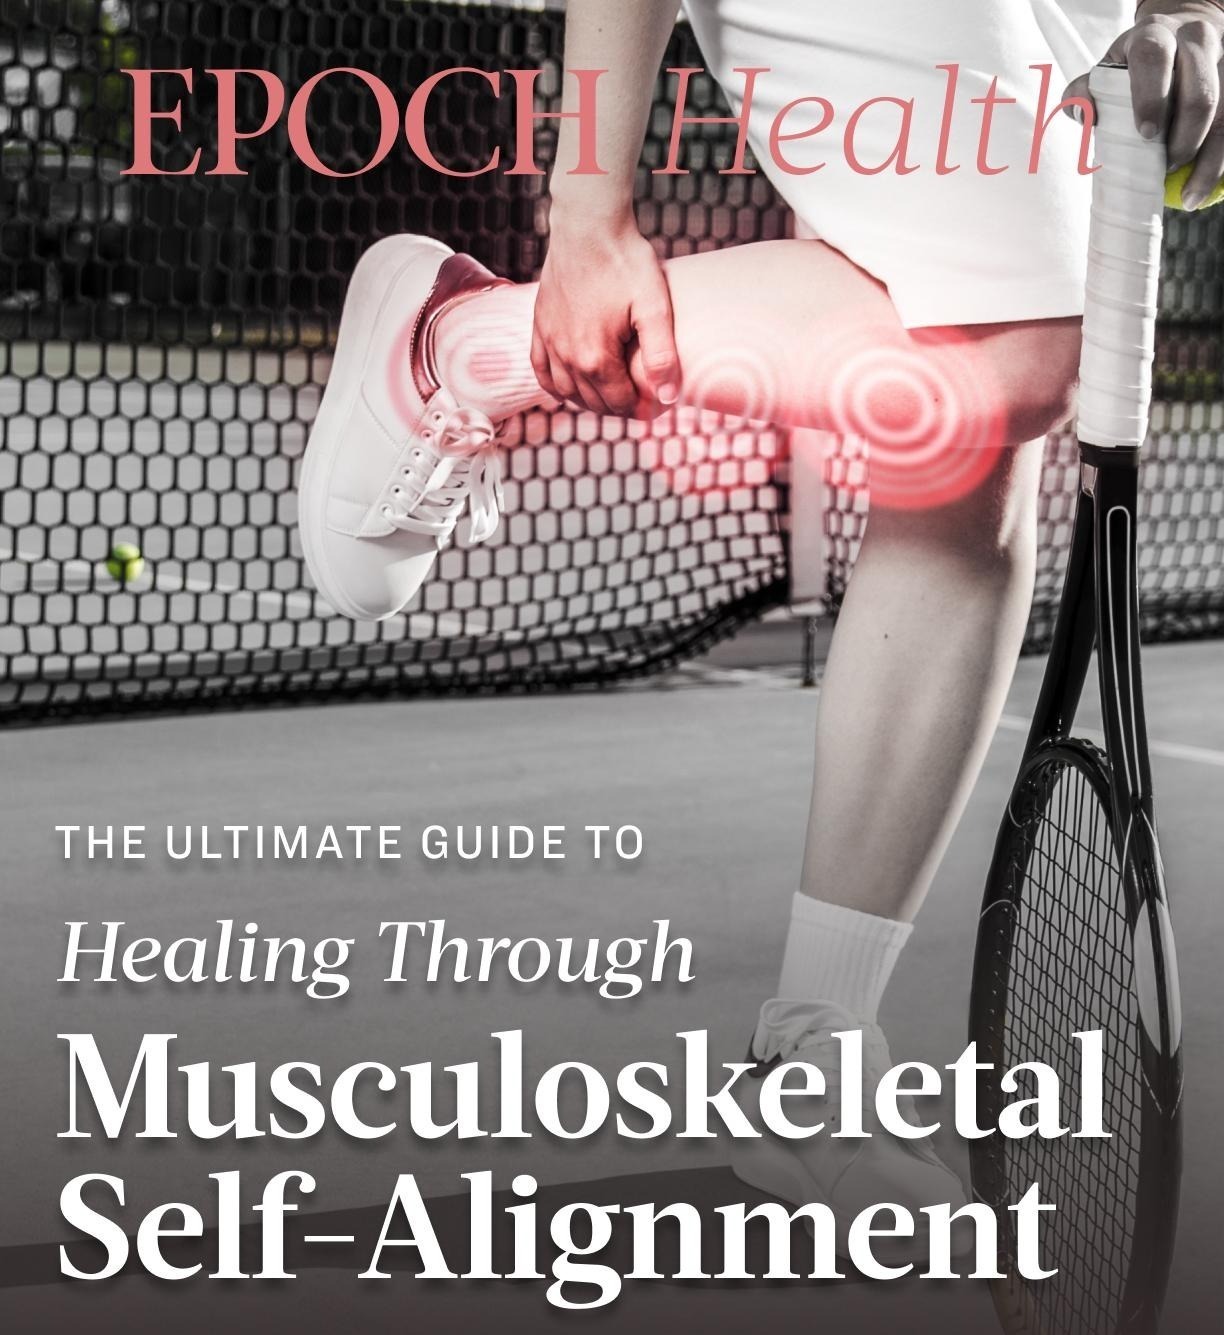 The Ultimate Guide to Healing Through Musculoskeletal Self-Alignment